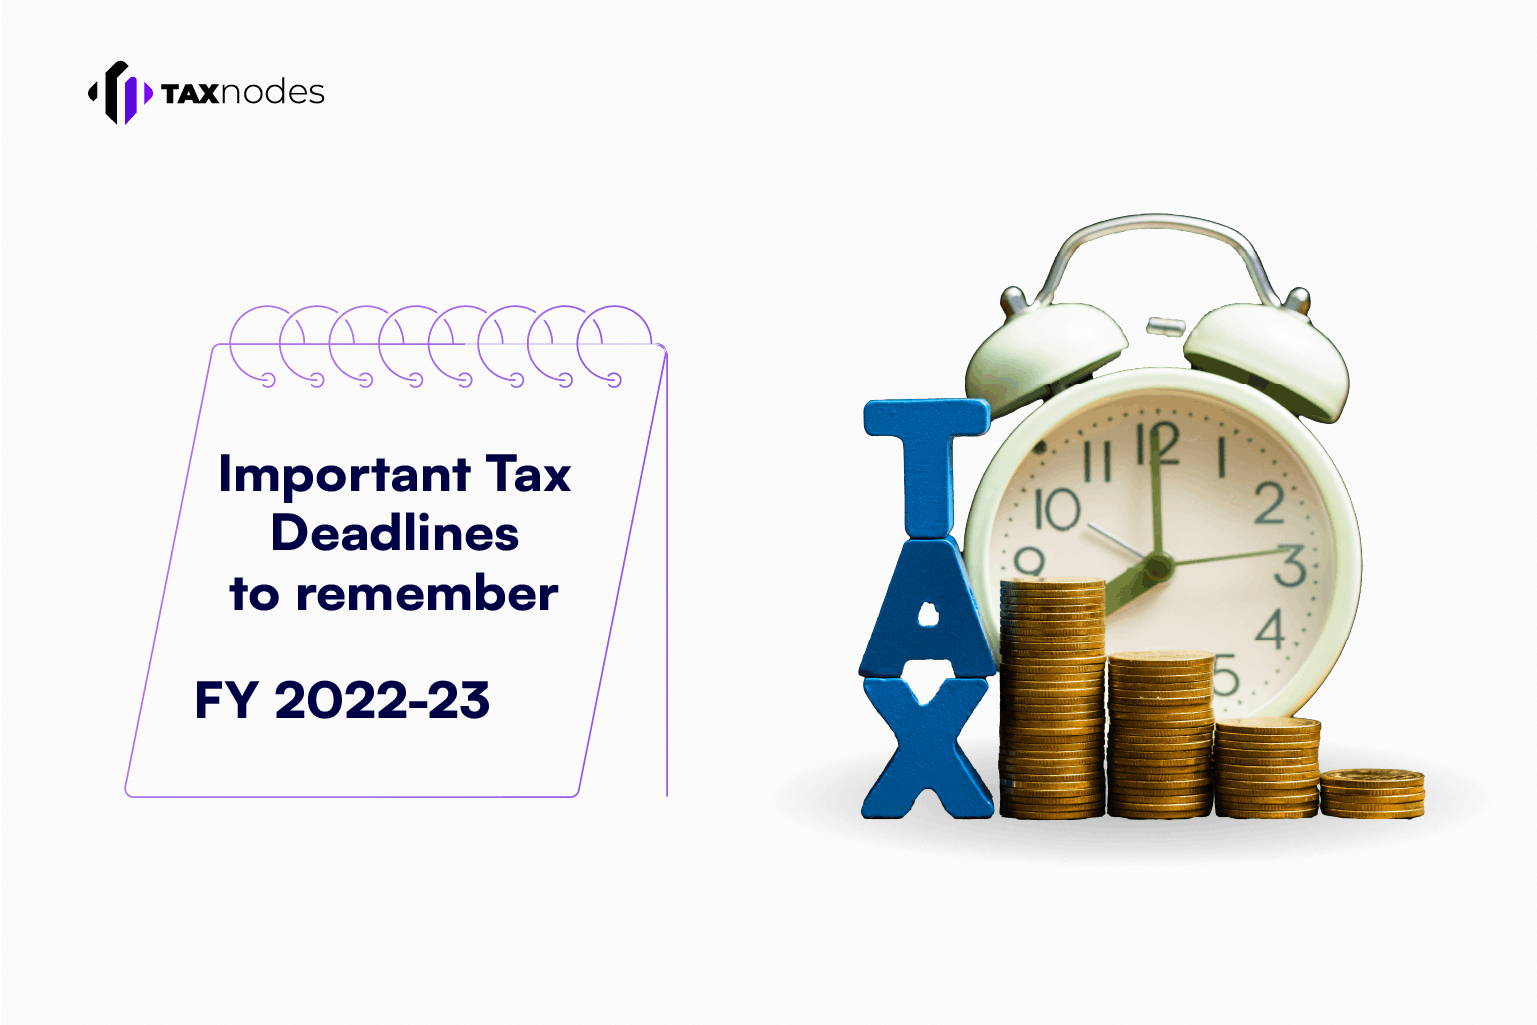 10 important tax deadlines to remember for FY 2022-23 and AY 2023-24